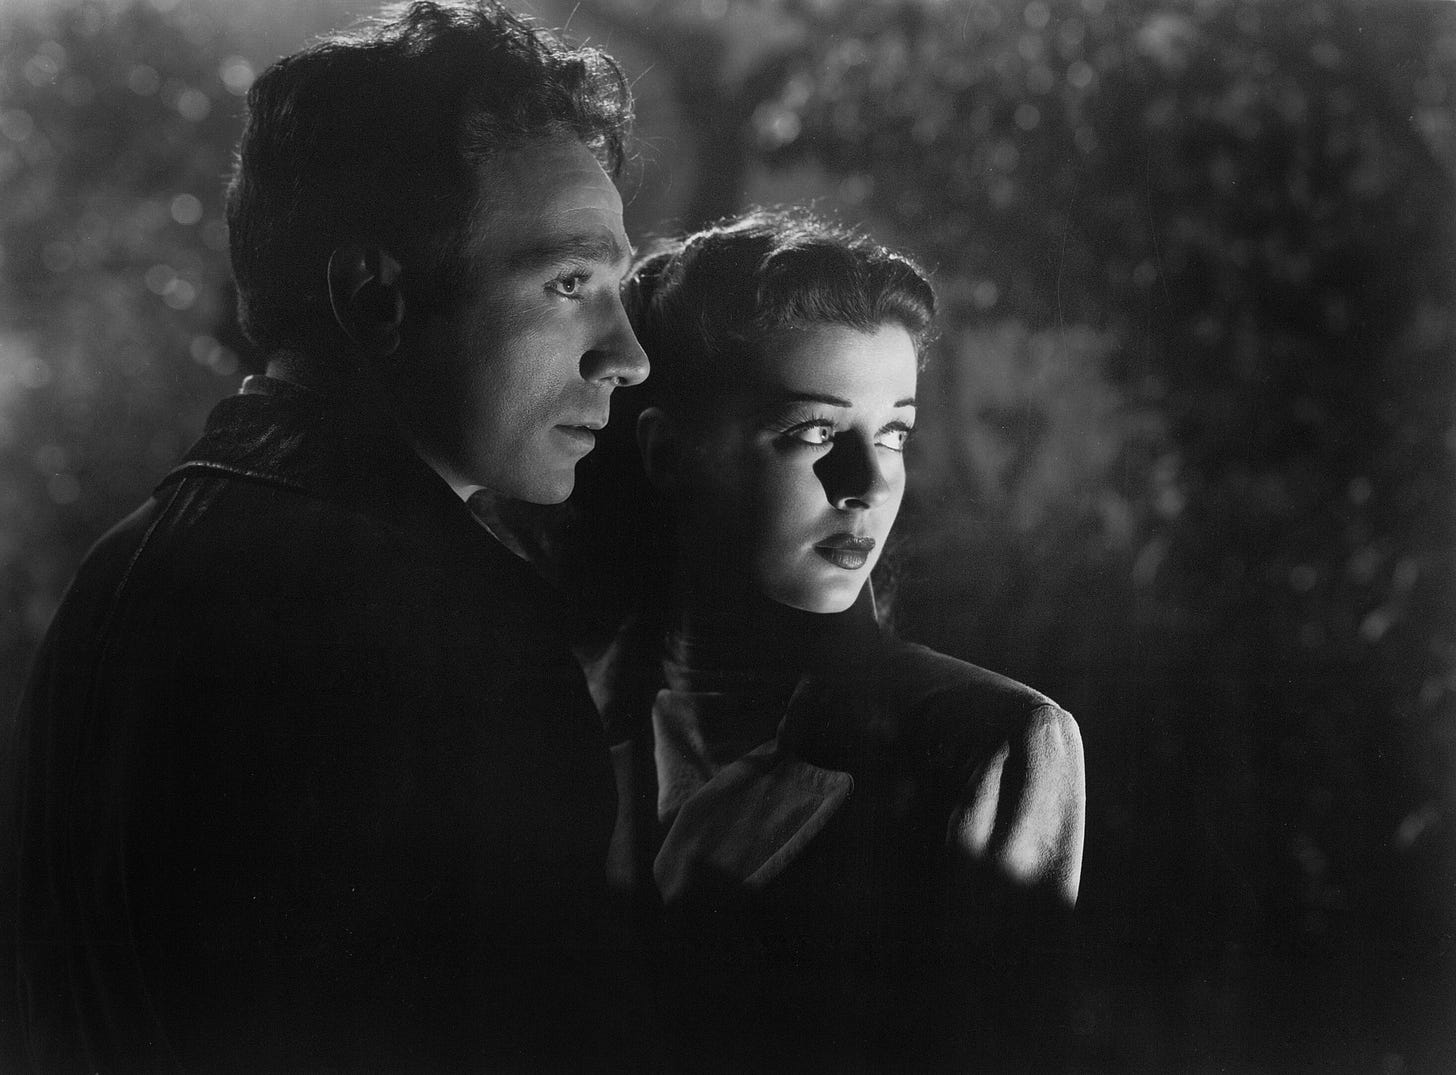 Moonrise. 1948. Directed by Frank Borzage | MoMA